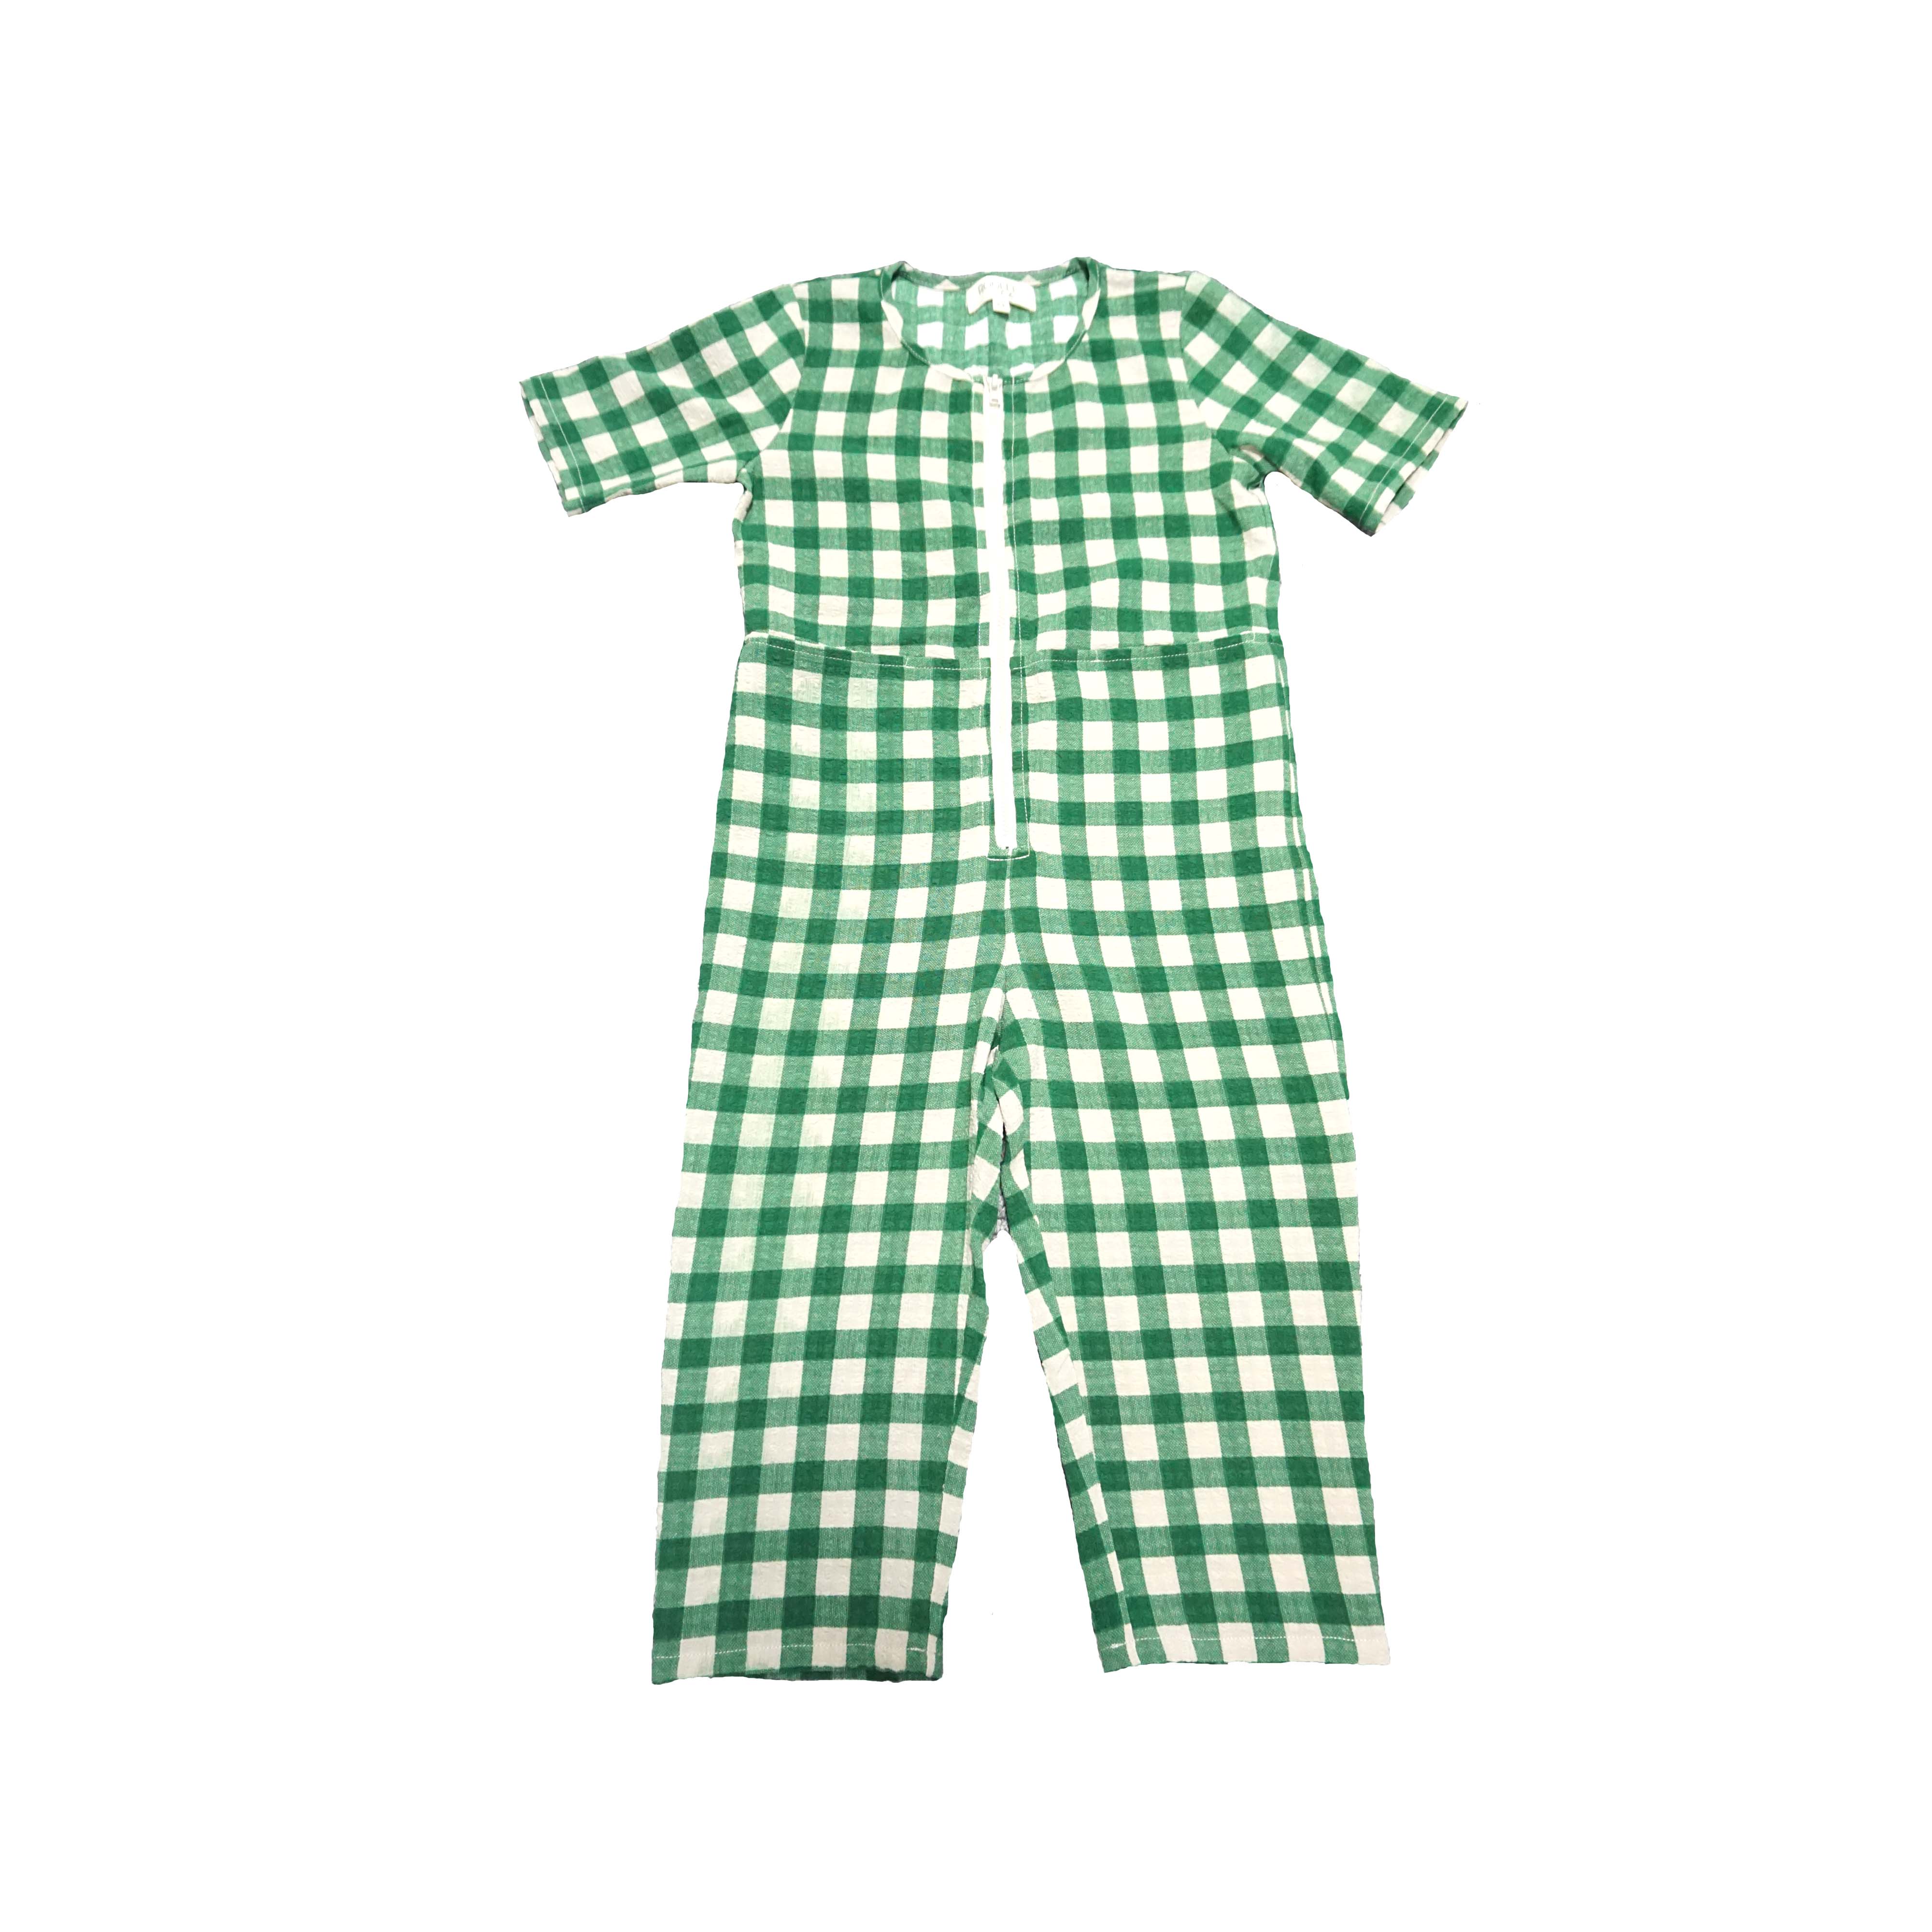 Green and white plaid jumpsuit